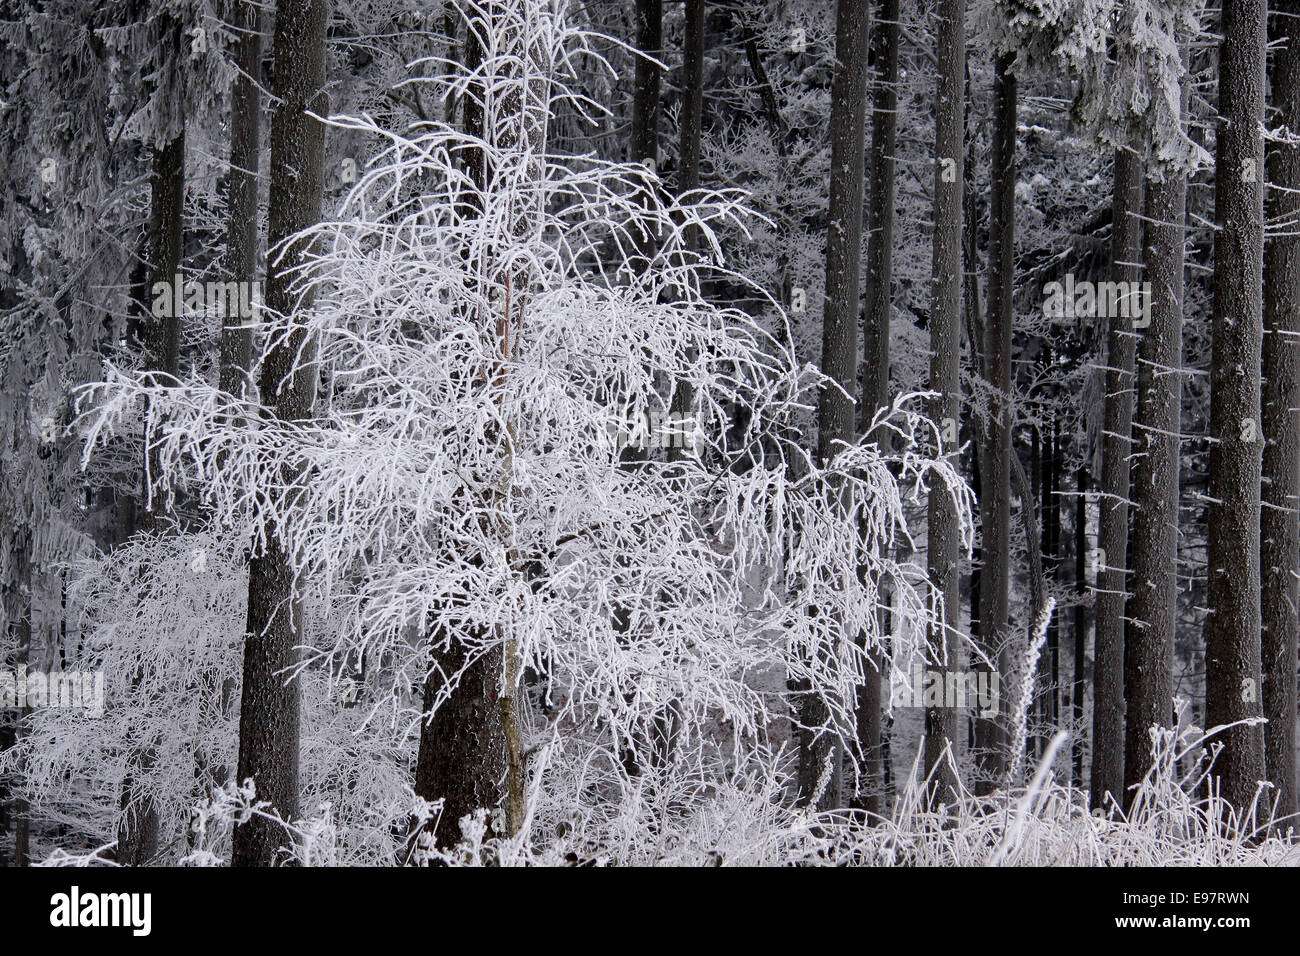 Snow covered wintry forest at Engenhahn in the Taunus mountains, Hesse, Germany Stock Photo